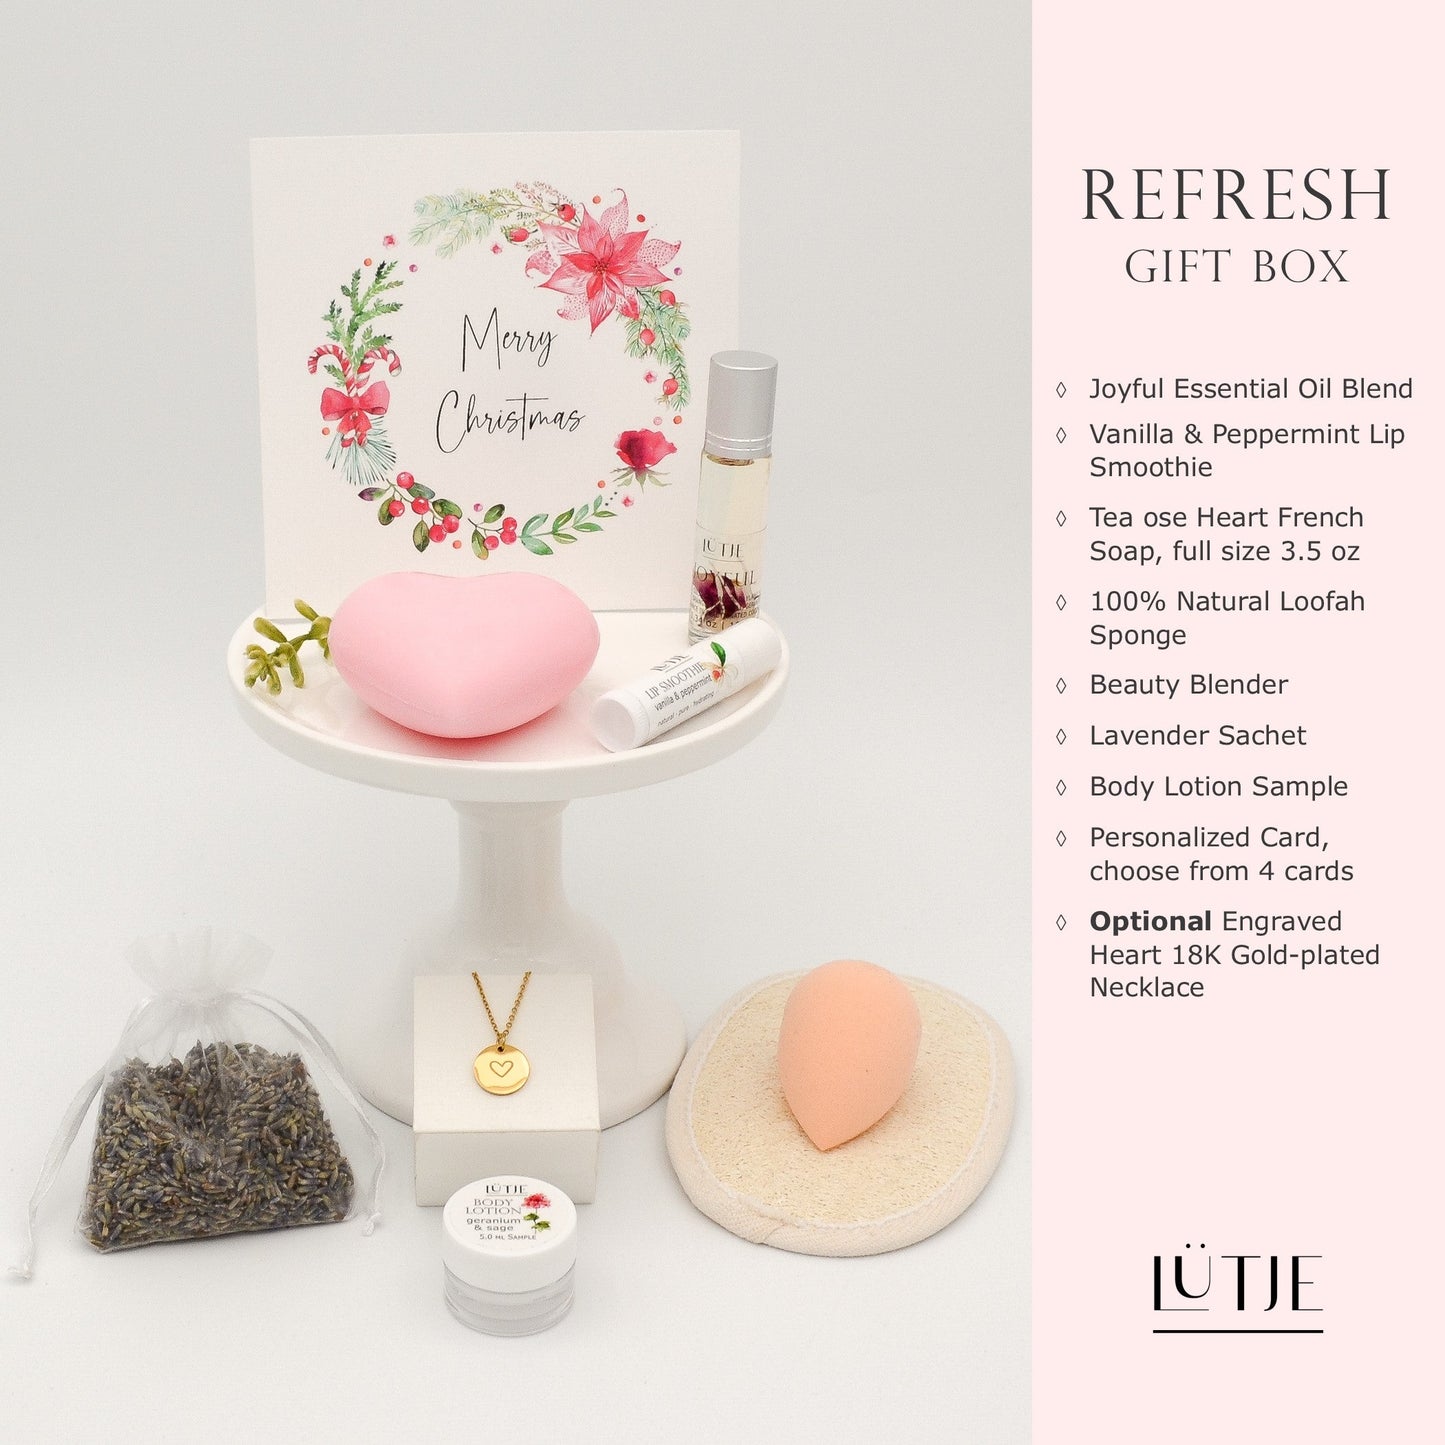 Refresh Gift Box for women, mom, BFF, wife, daughter, sister, or grandma, includes essential oil, French soap, lip balm, hydrating face mask, and 18K gold-plated necklace with engraved heart.